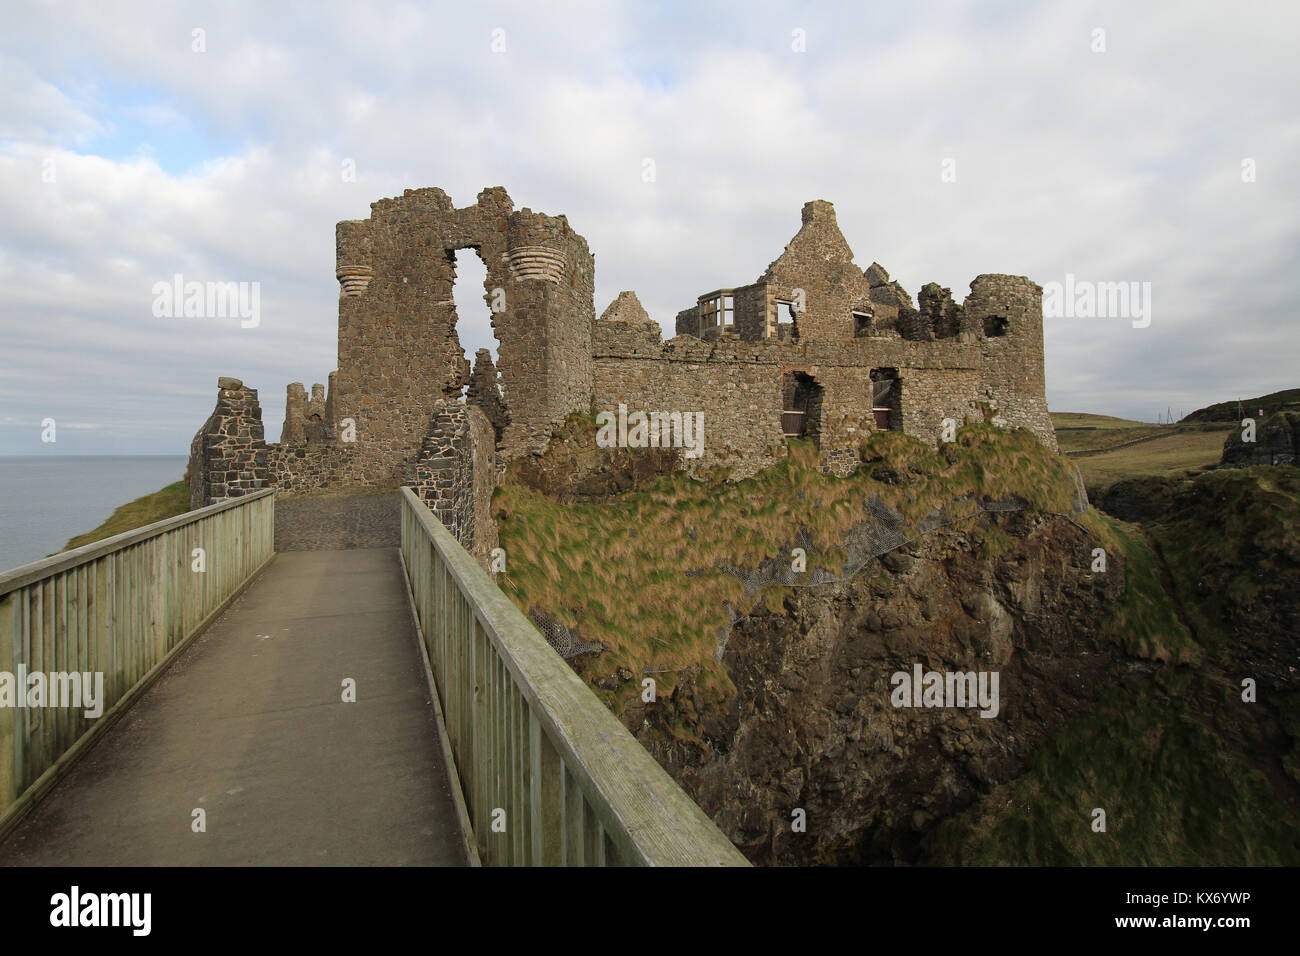 The visitor entrance to ruins of Dunluce Castle on the County Antrim coast. Dunluce Castle is a popular castle to visit in Northern Ireland. Stock Photo